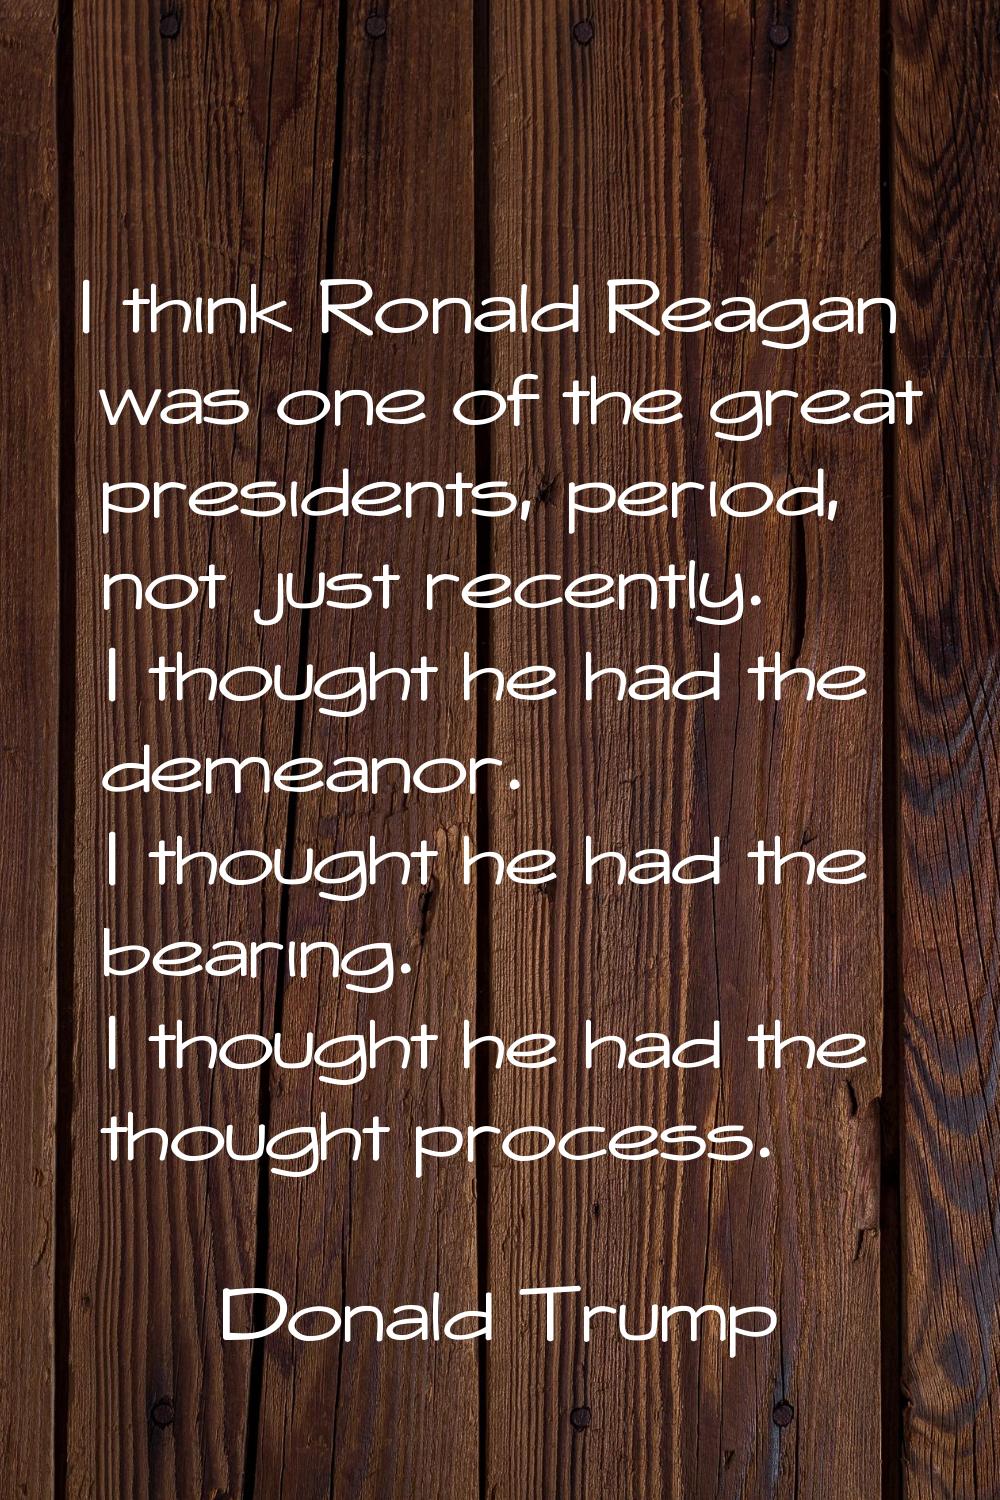 I think Ronald Reagan was one of the great presidents, period, not just recently. I thought he had 